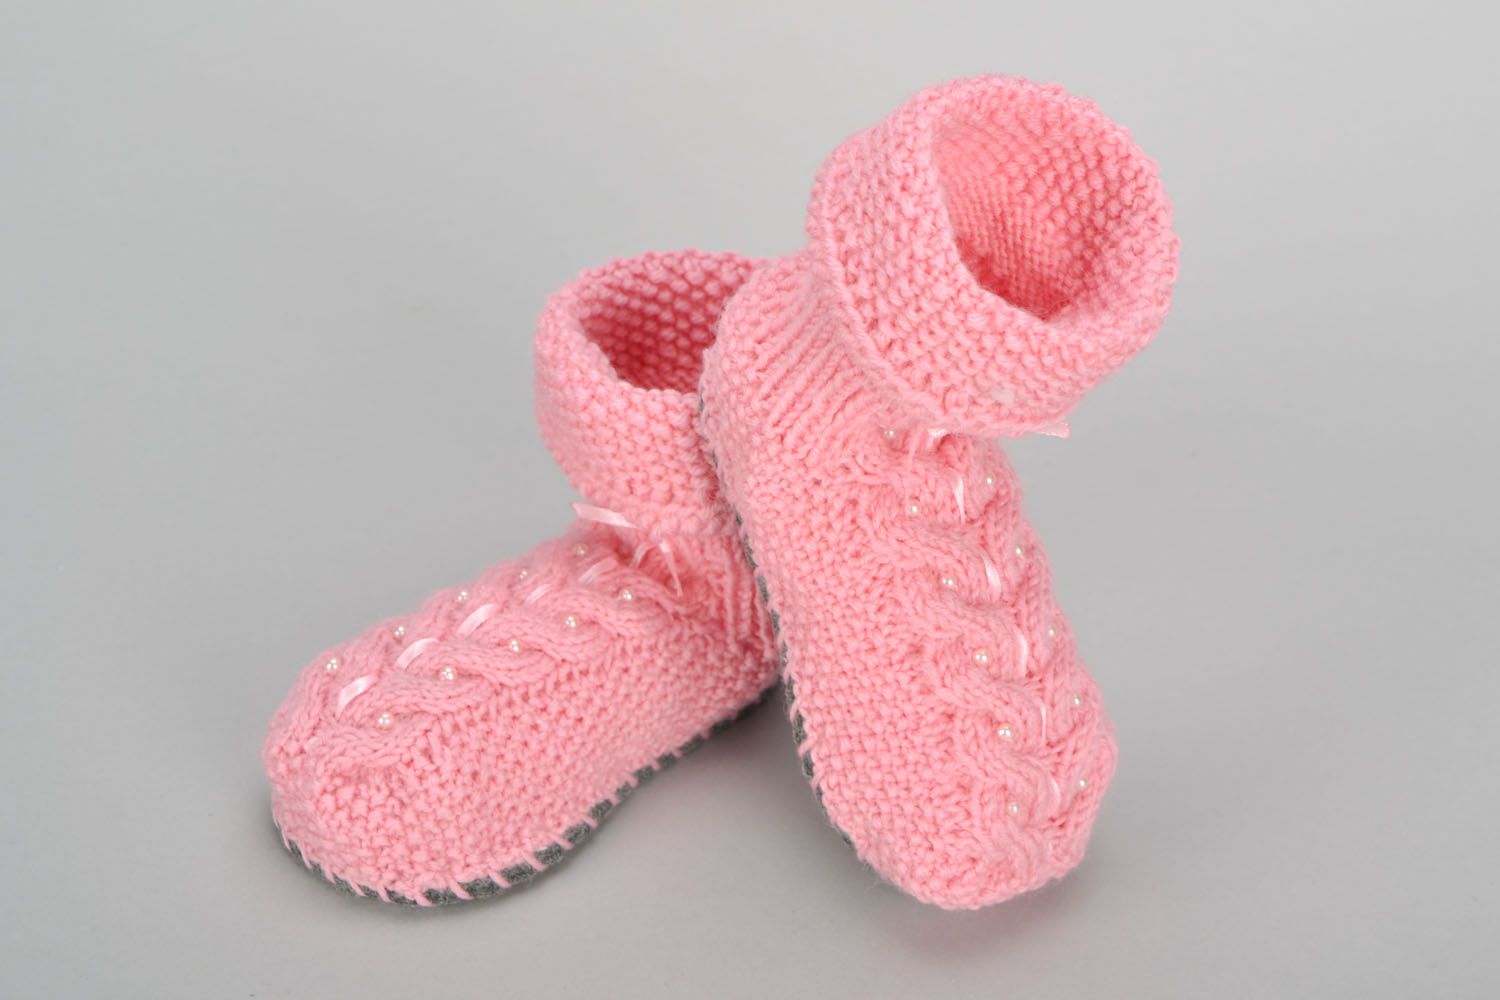 Crochet baby shoes photo 3